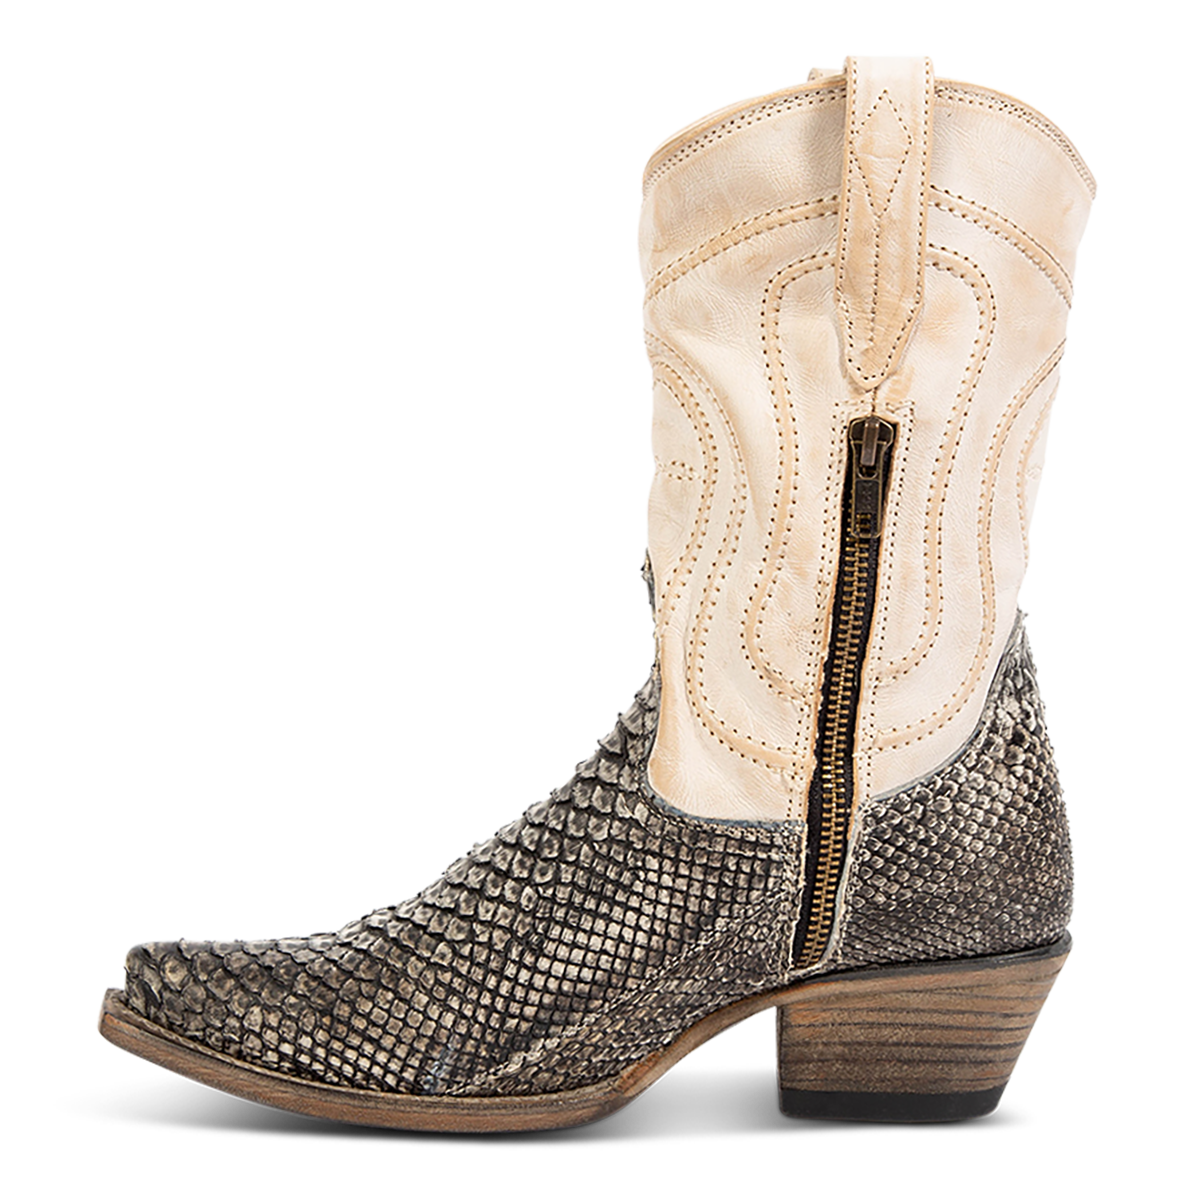 Inside view showing working brass zip closure on FREEBIRD women's Warrick grey python multi exotic leather western cowgirl mid calf boot